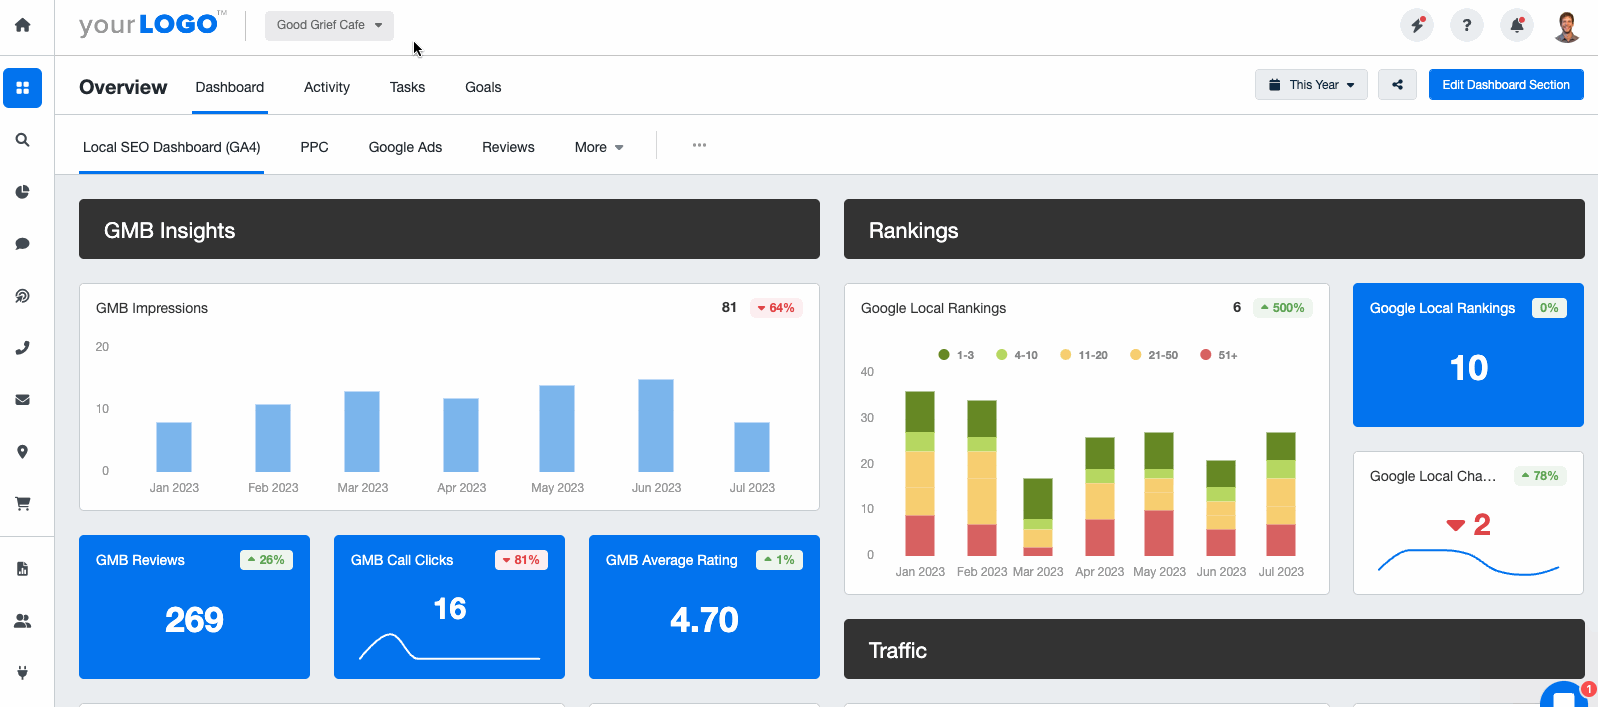 showing different client dashboards within the AgencyAnalytics platform